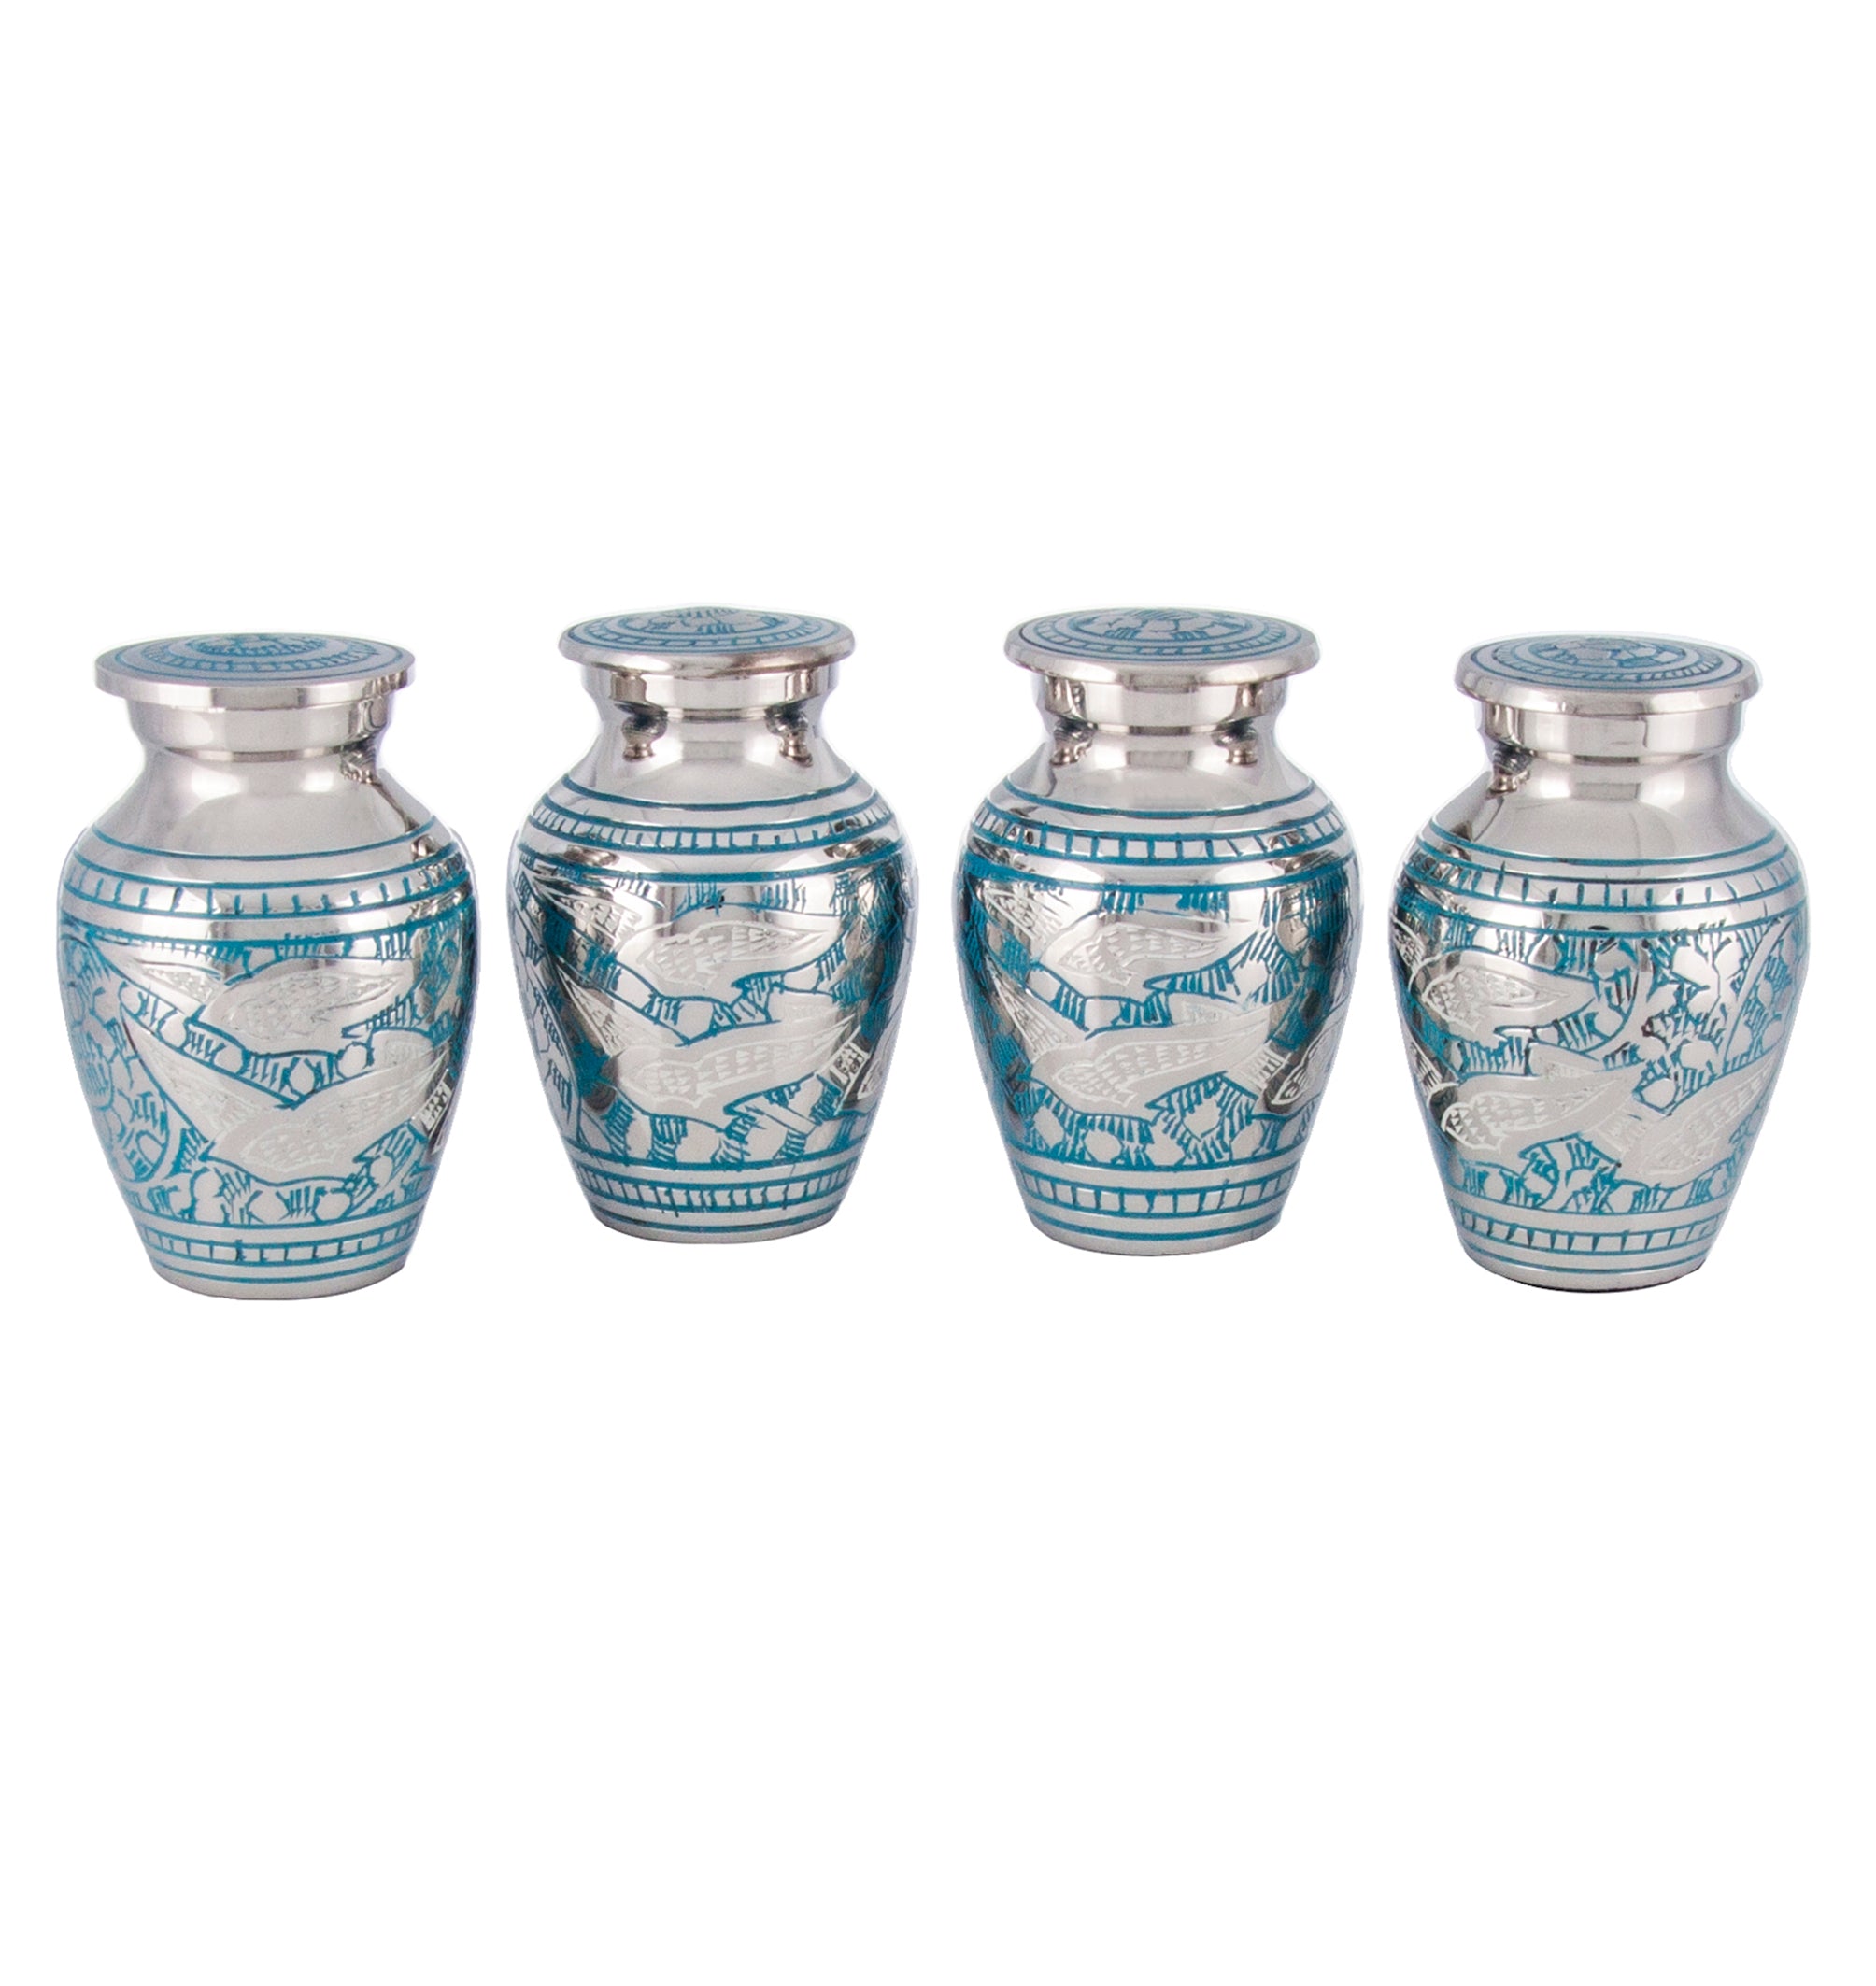 SMALL KEEPSAKE URN COLLECTION - GOING HOME - SET OF 4